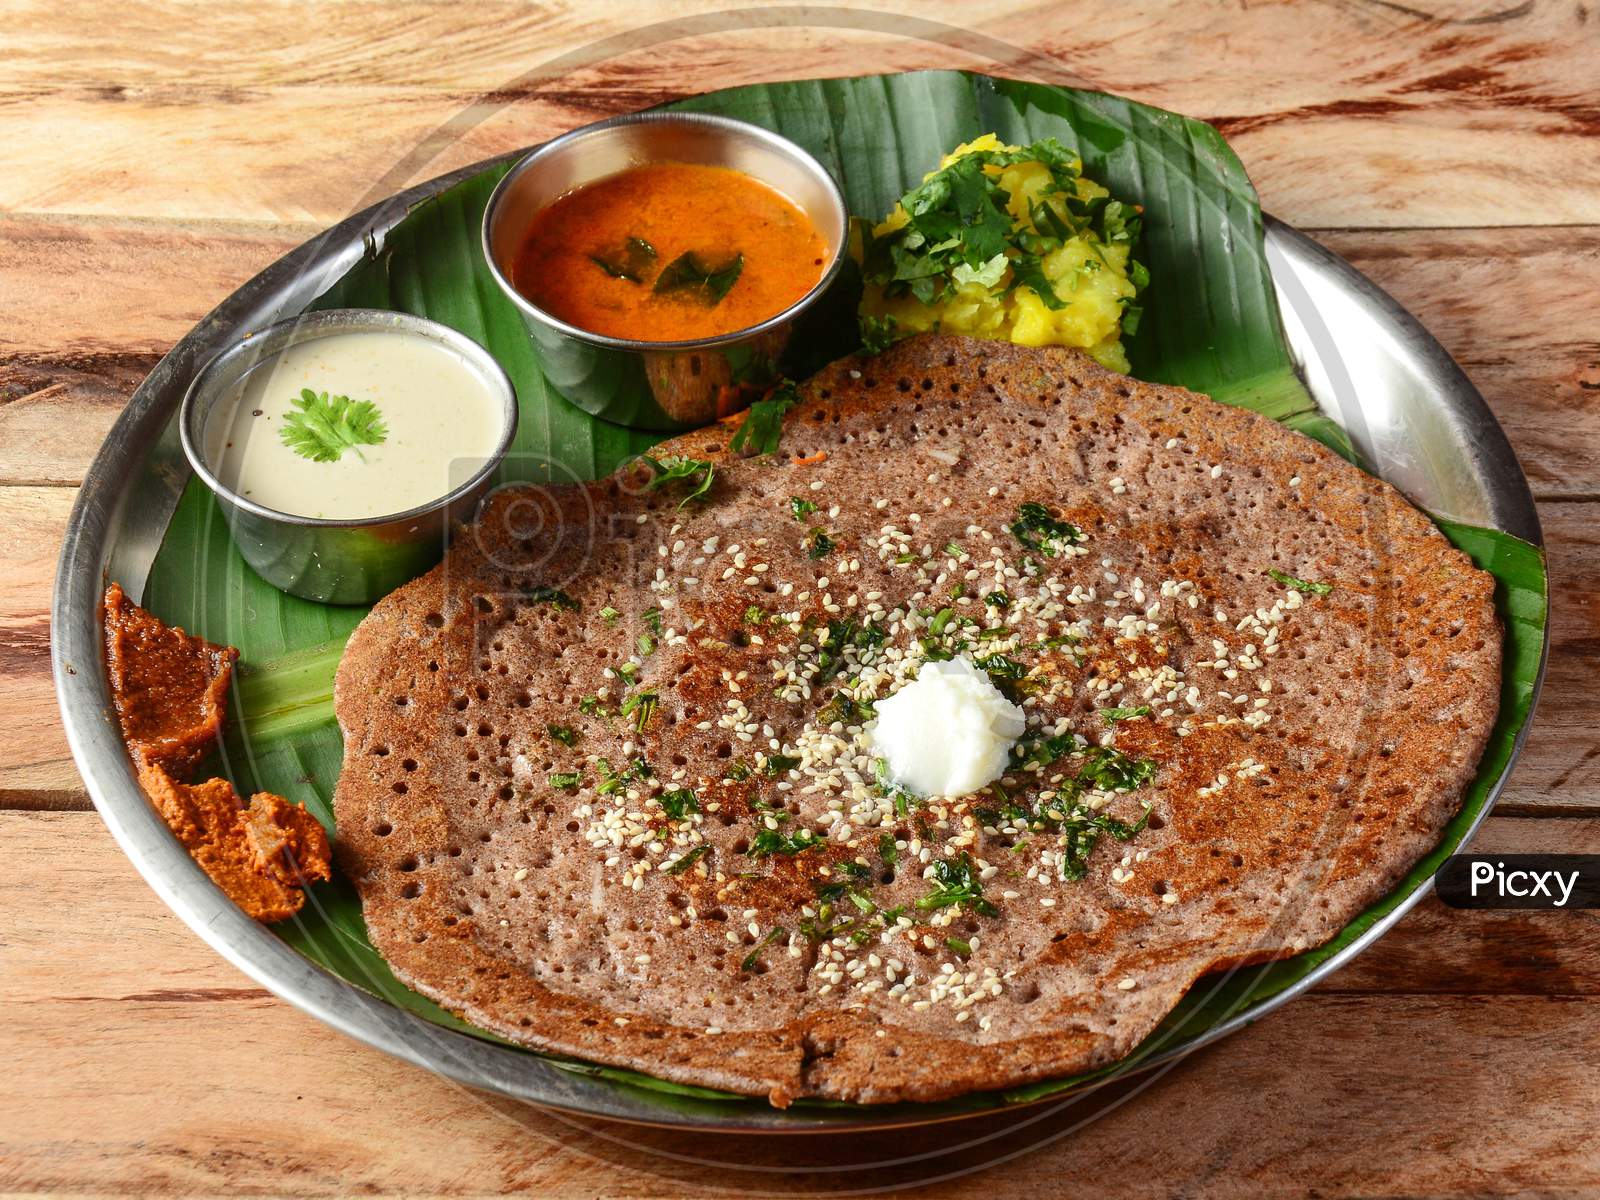 Ragi Dosa Or Finger Millet Dosa A South Indian Traditional Breakfast Served With Chutney,Sambar And Potato Masala Topped With Butter And Served Over A Rustic Wooden Background, Selective Focus